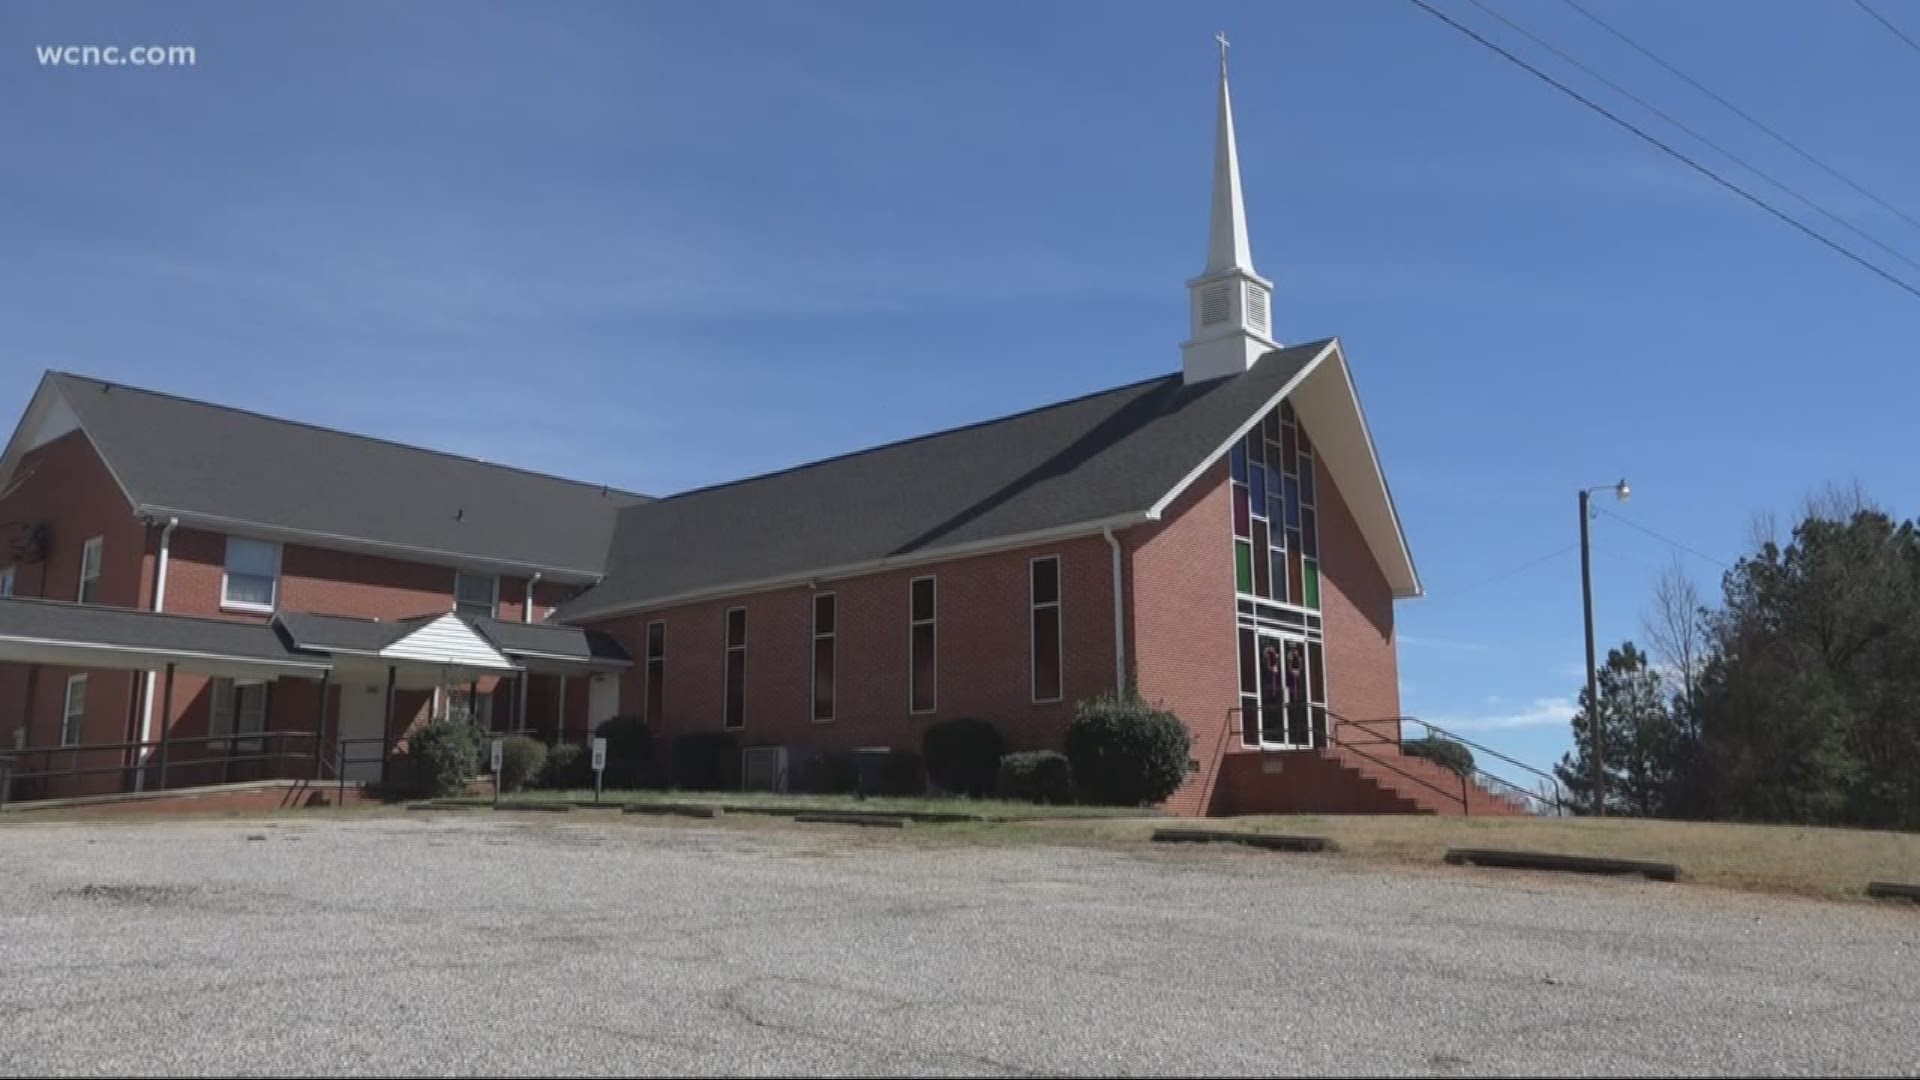 Police said the suspect hit four different churches in less than two hours this past Sunday.